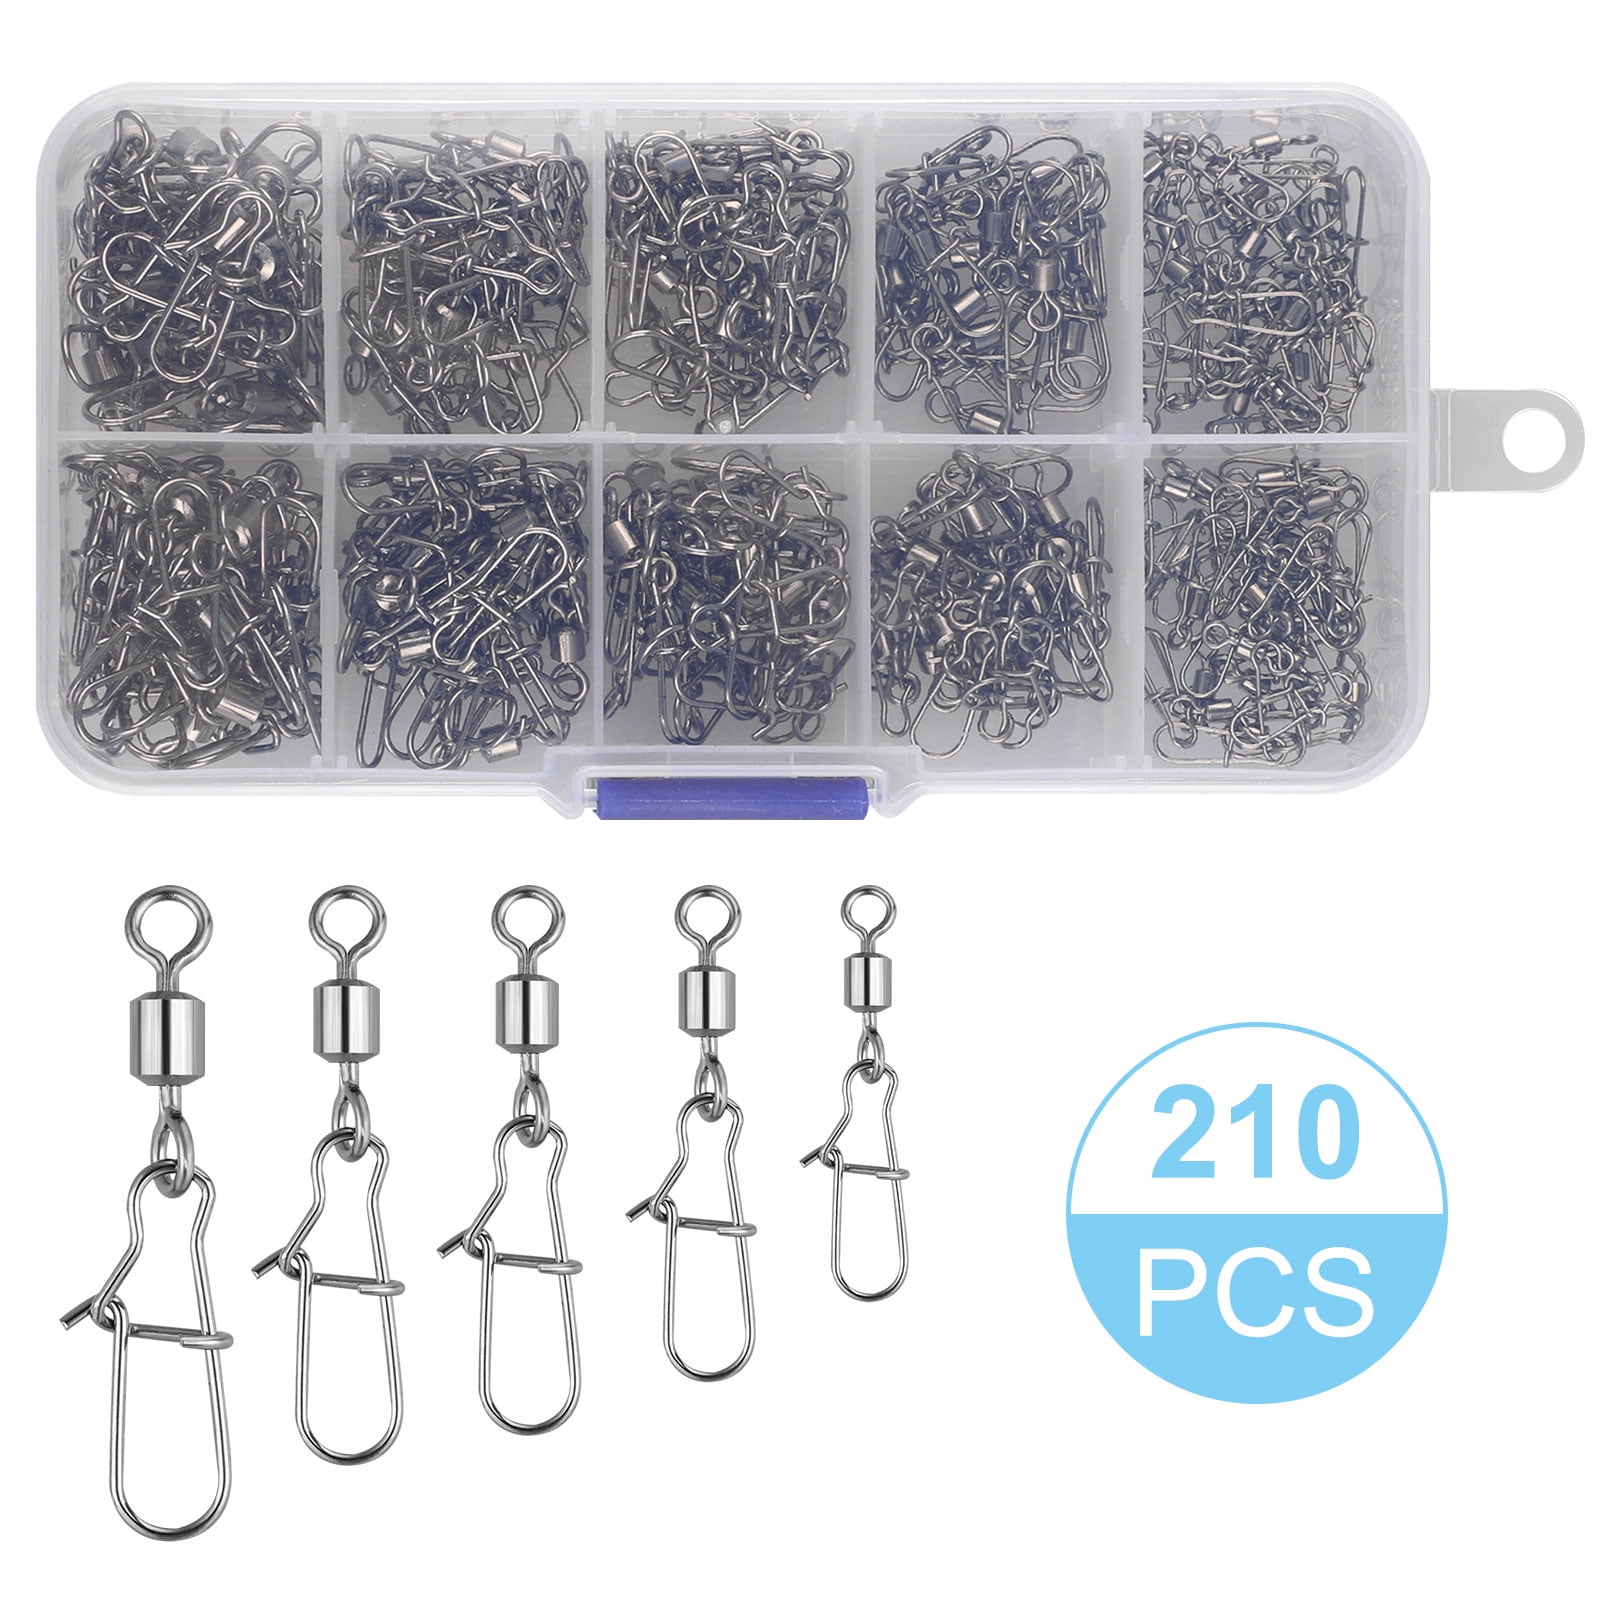 EEEkit Fishing 210pieces/Box Fishing Swivel Snap Connectors Size 2 4 5 6 8  High-Strength Fishing Rolling Swivels with Nice Snaps Fishing Tackle Kit (Stainless  Steel),#2 #4 #5 #6 #8 